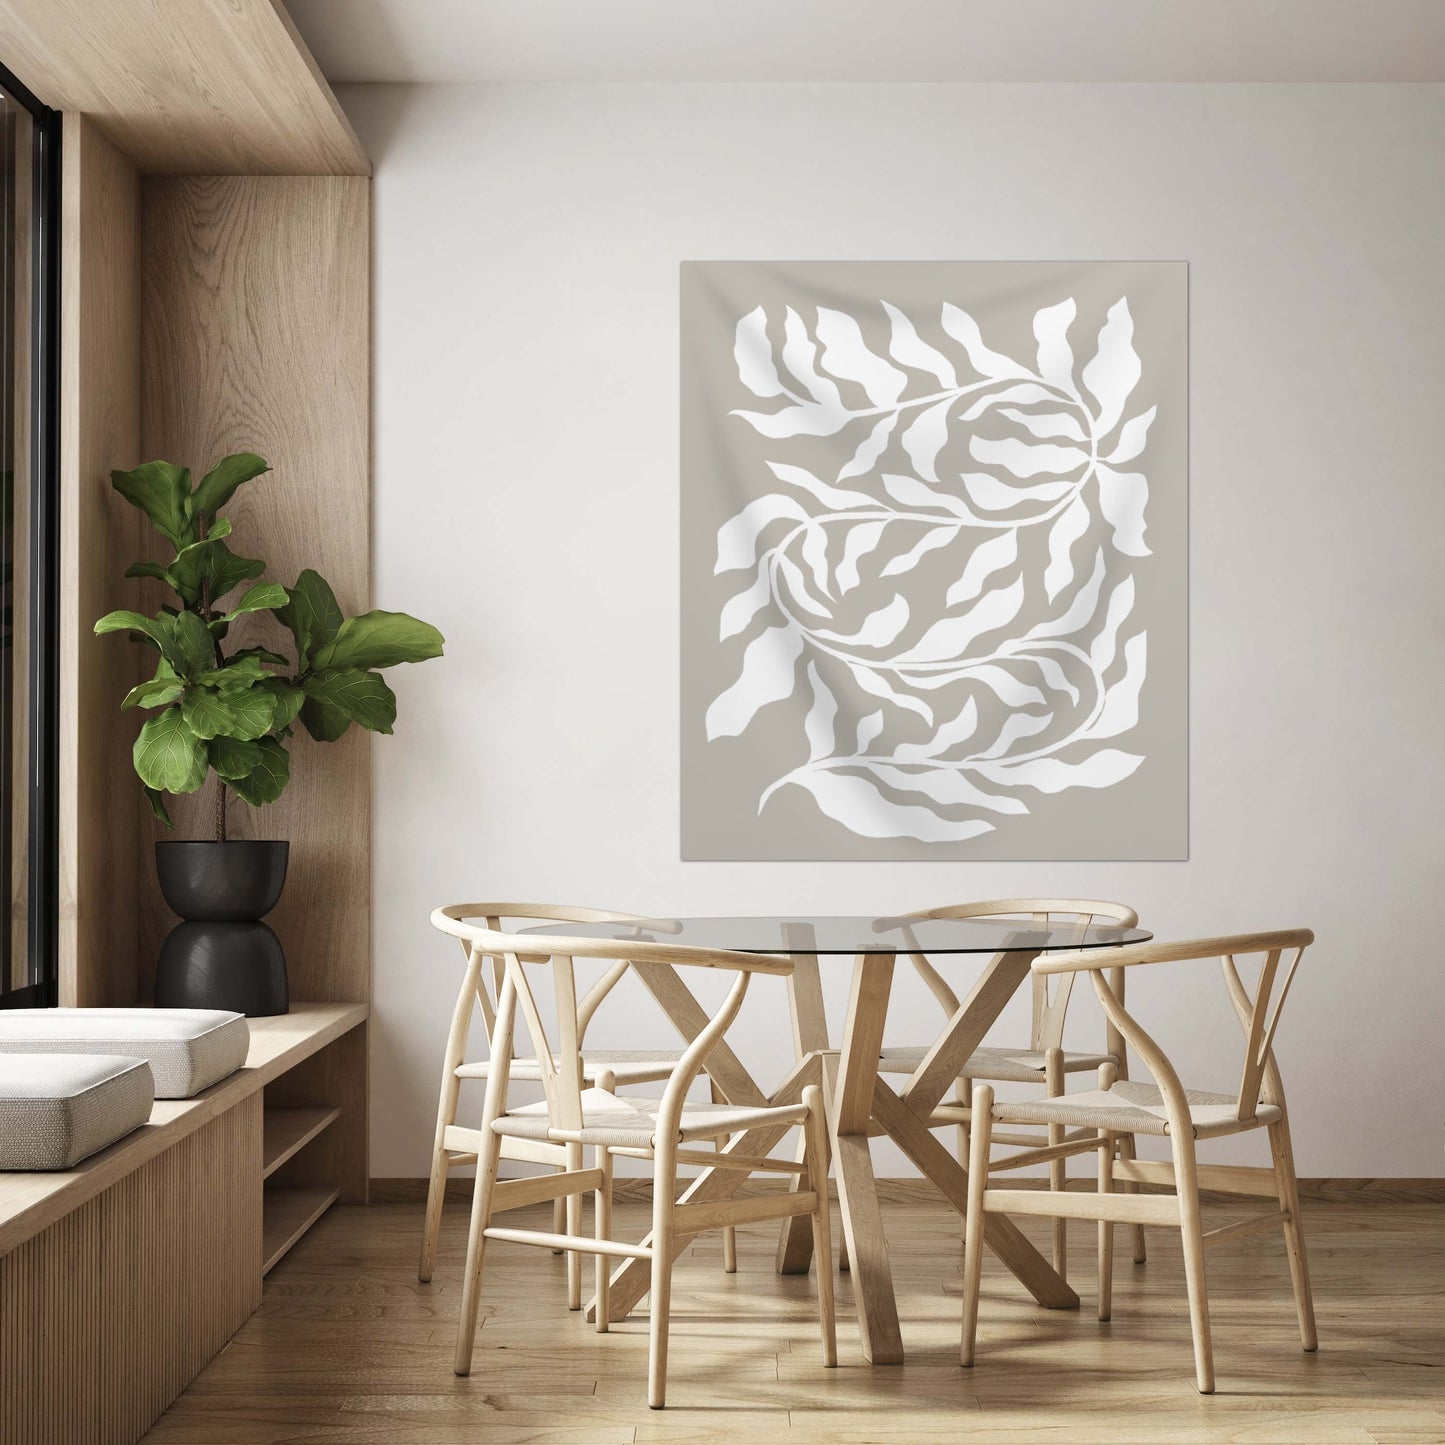 Earth Tone Wall Tapestry